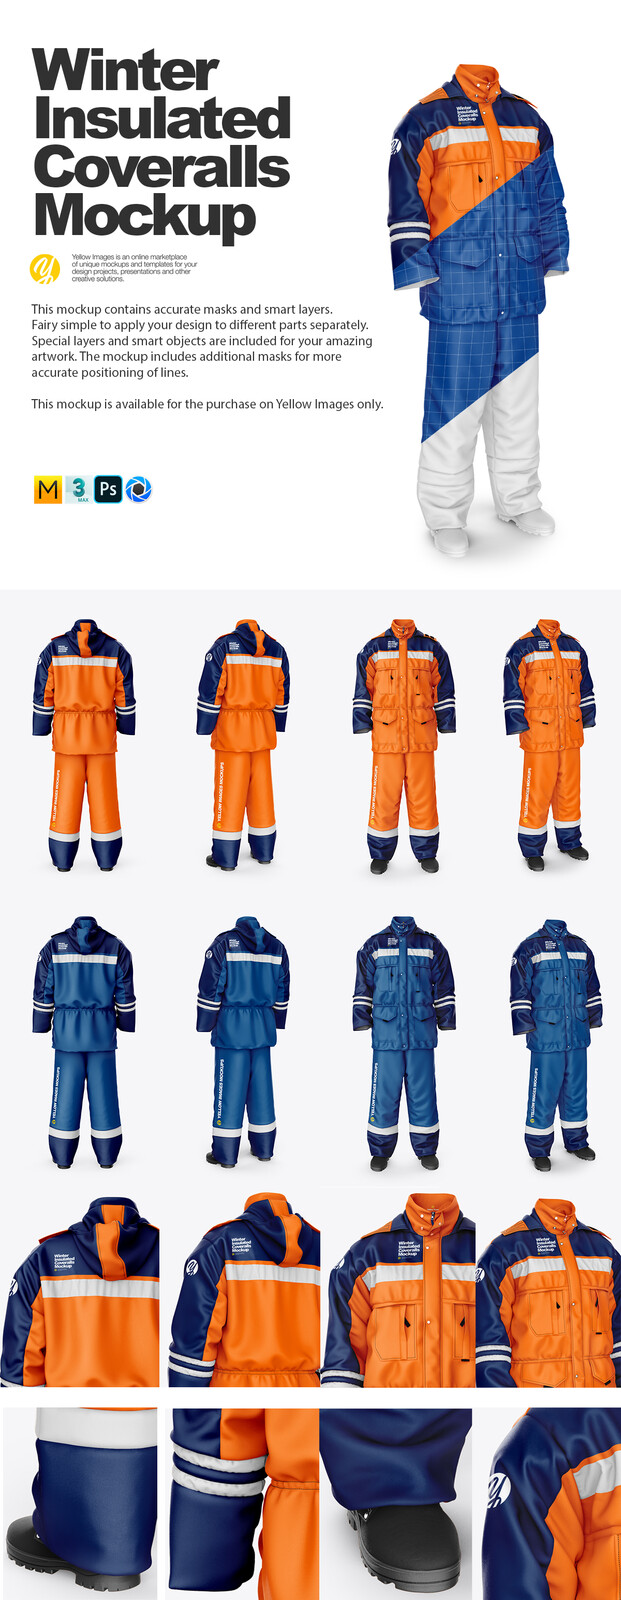 Download Artstation Winter Insulated Coveralls Mockup Andrey Yeskov A K A Rhino PSD Mockup Templates